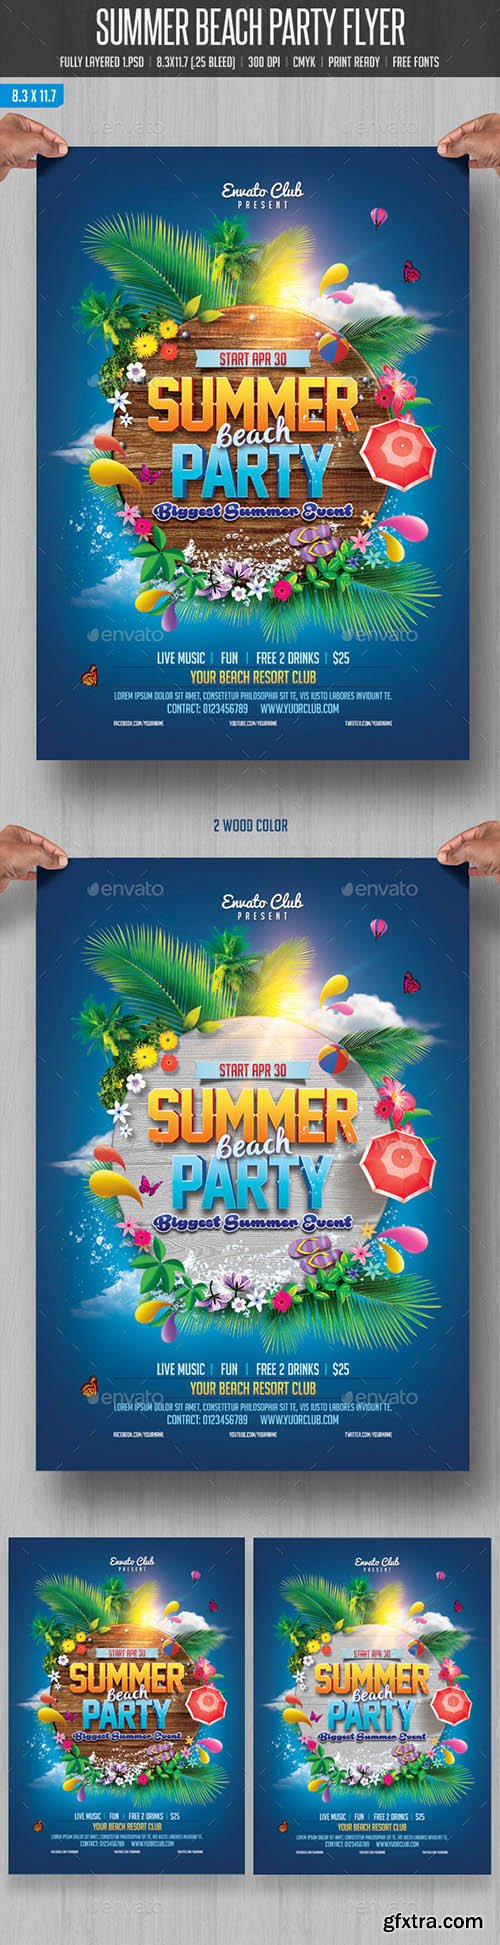 GraphicRiver - Summer Beach Party 10880683